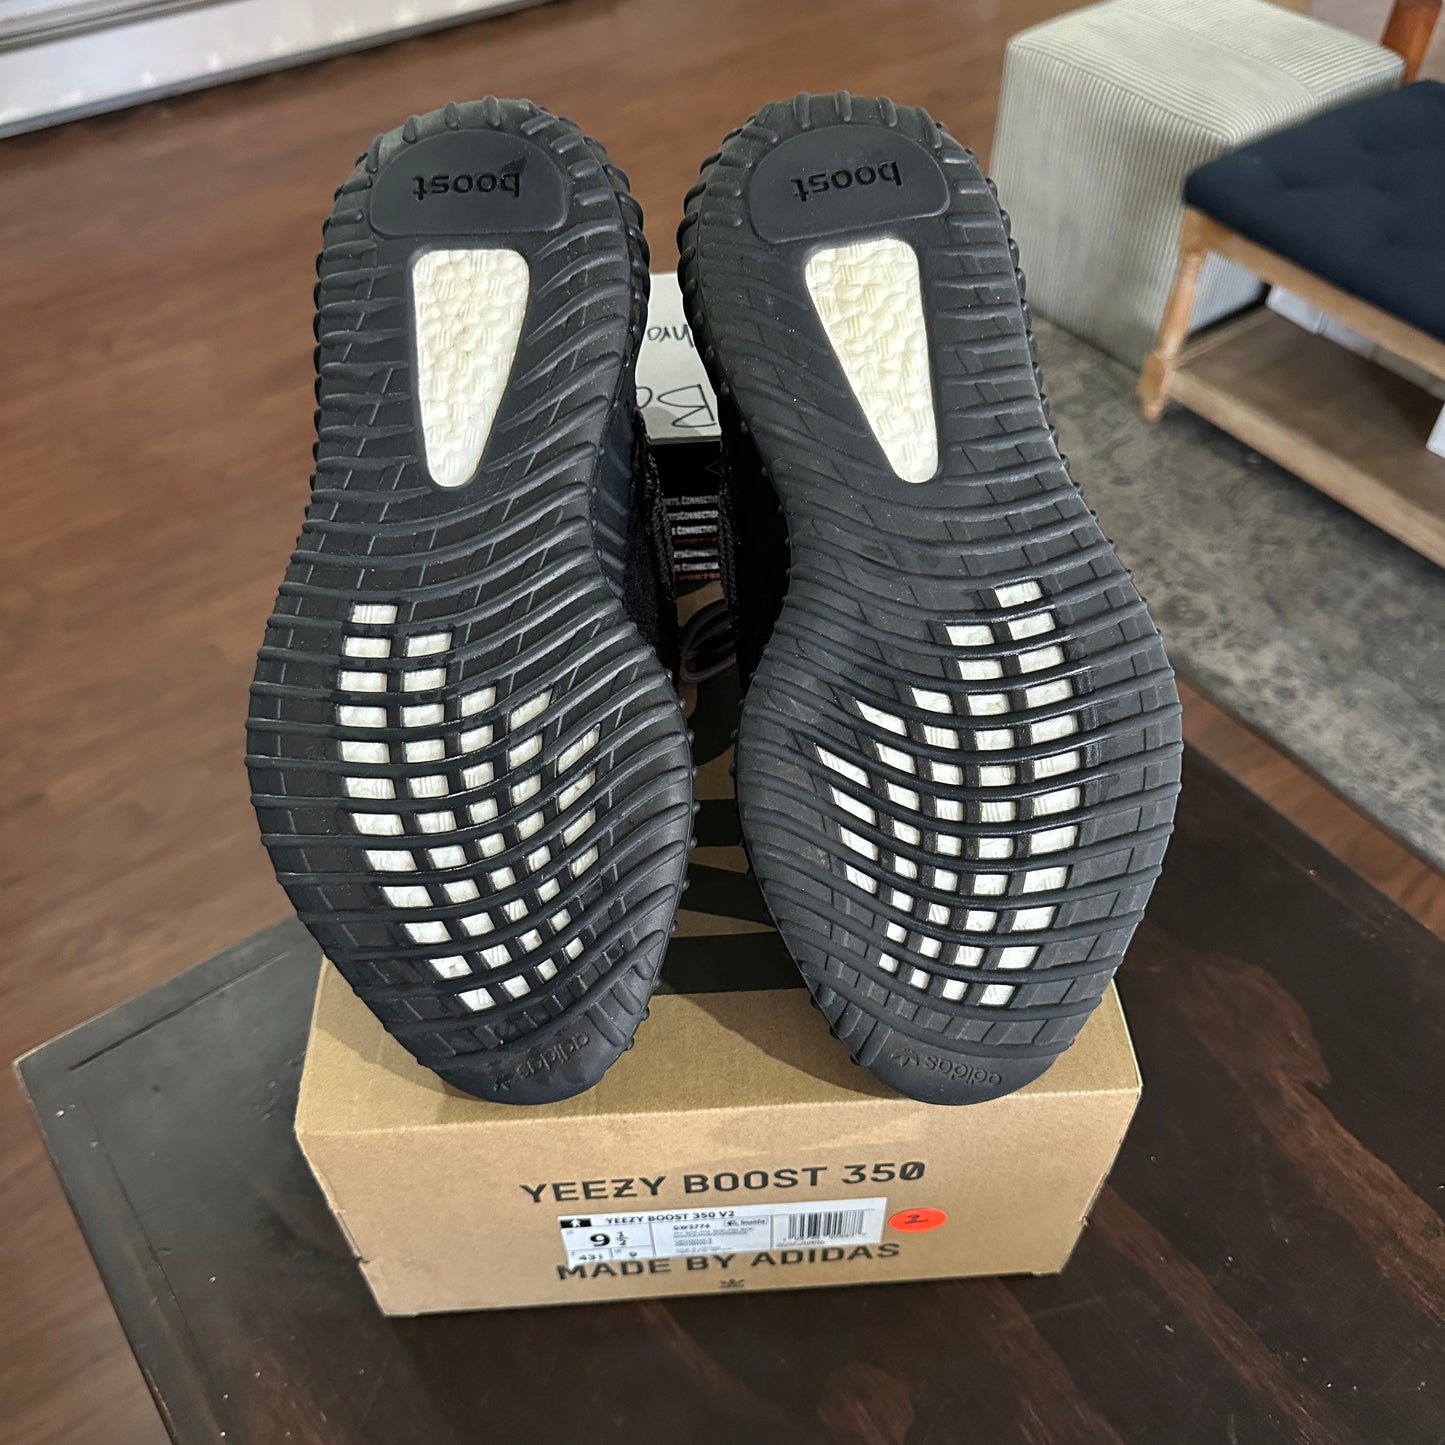 *USED* Yeezy Boost 350 v2 MX Rock (size 9.5)